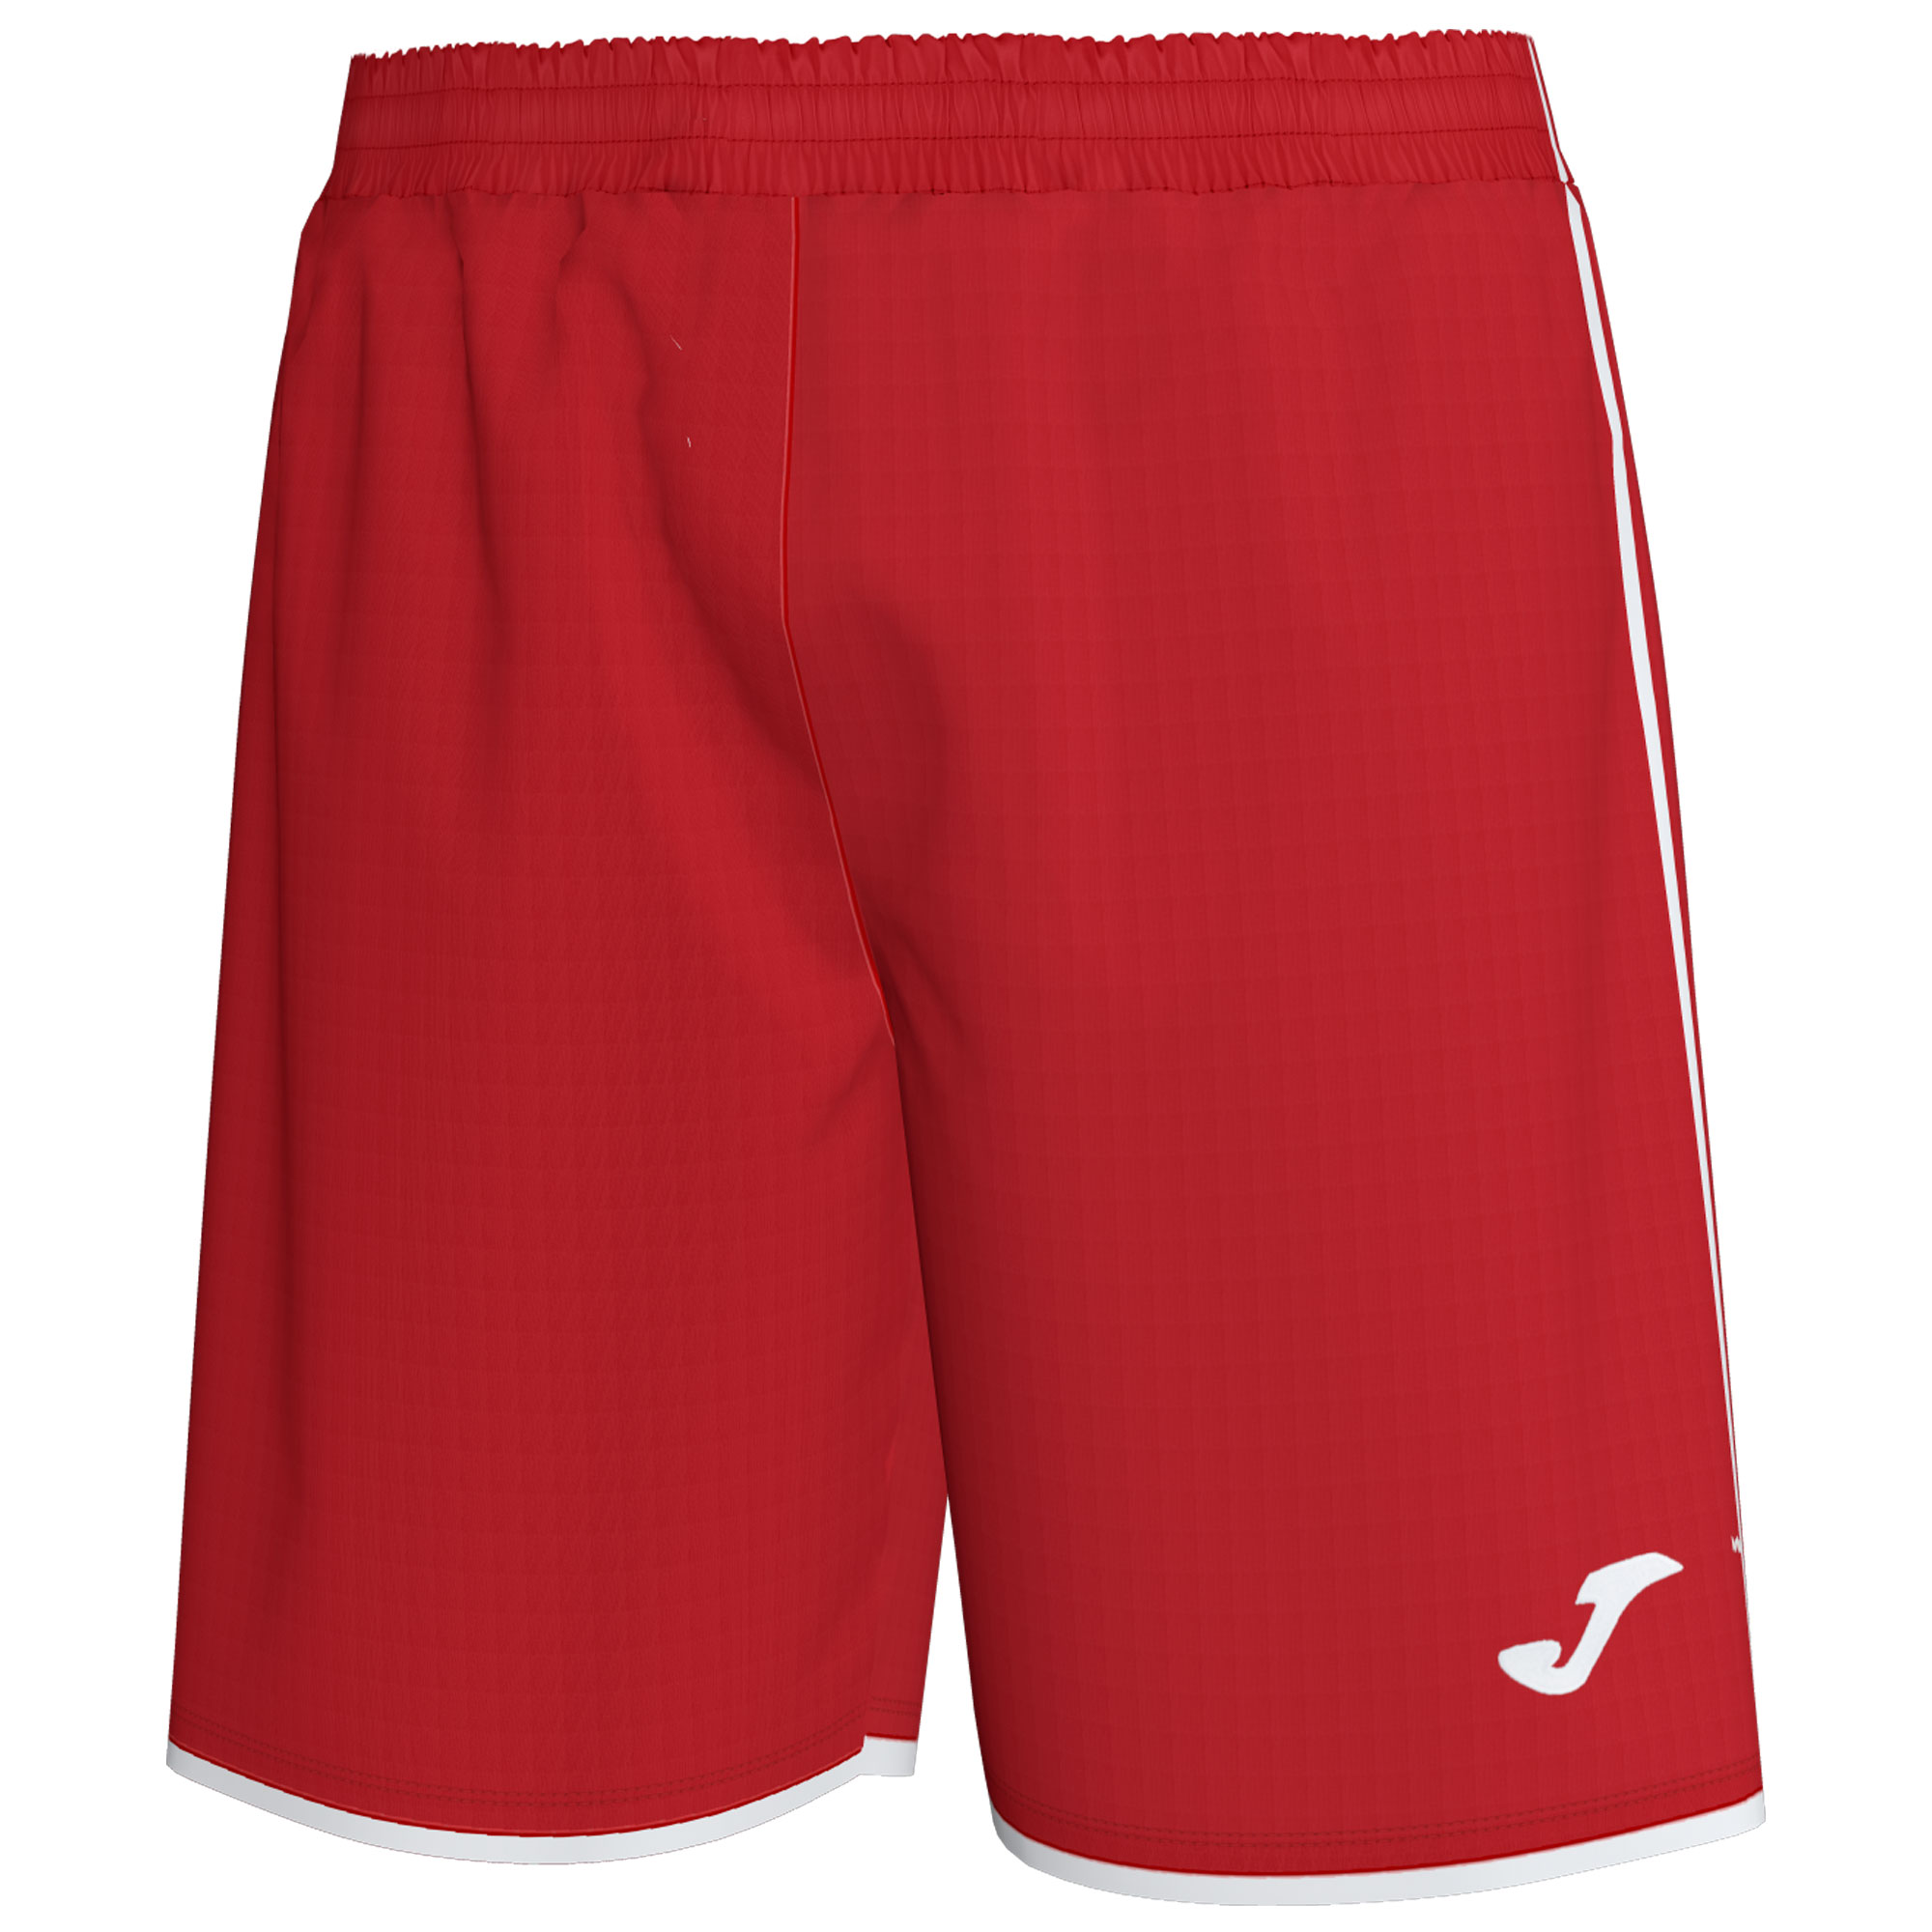 Total Teamwear :: ALBION ROVERS TRAINING SHORTS RED/WHITE